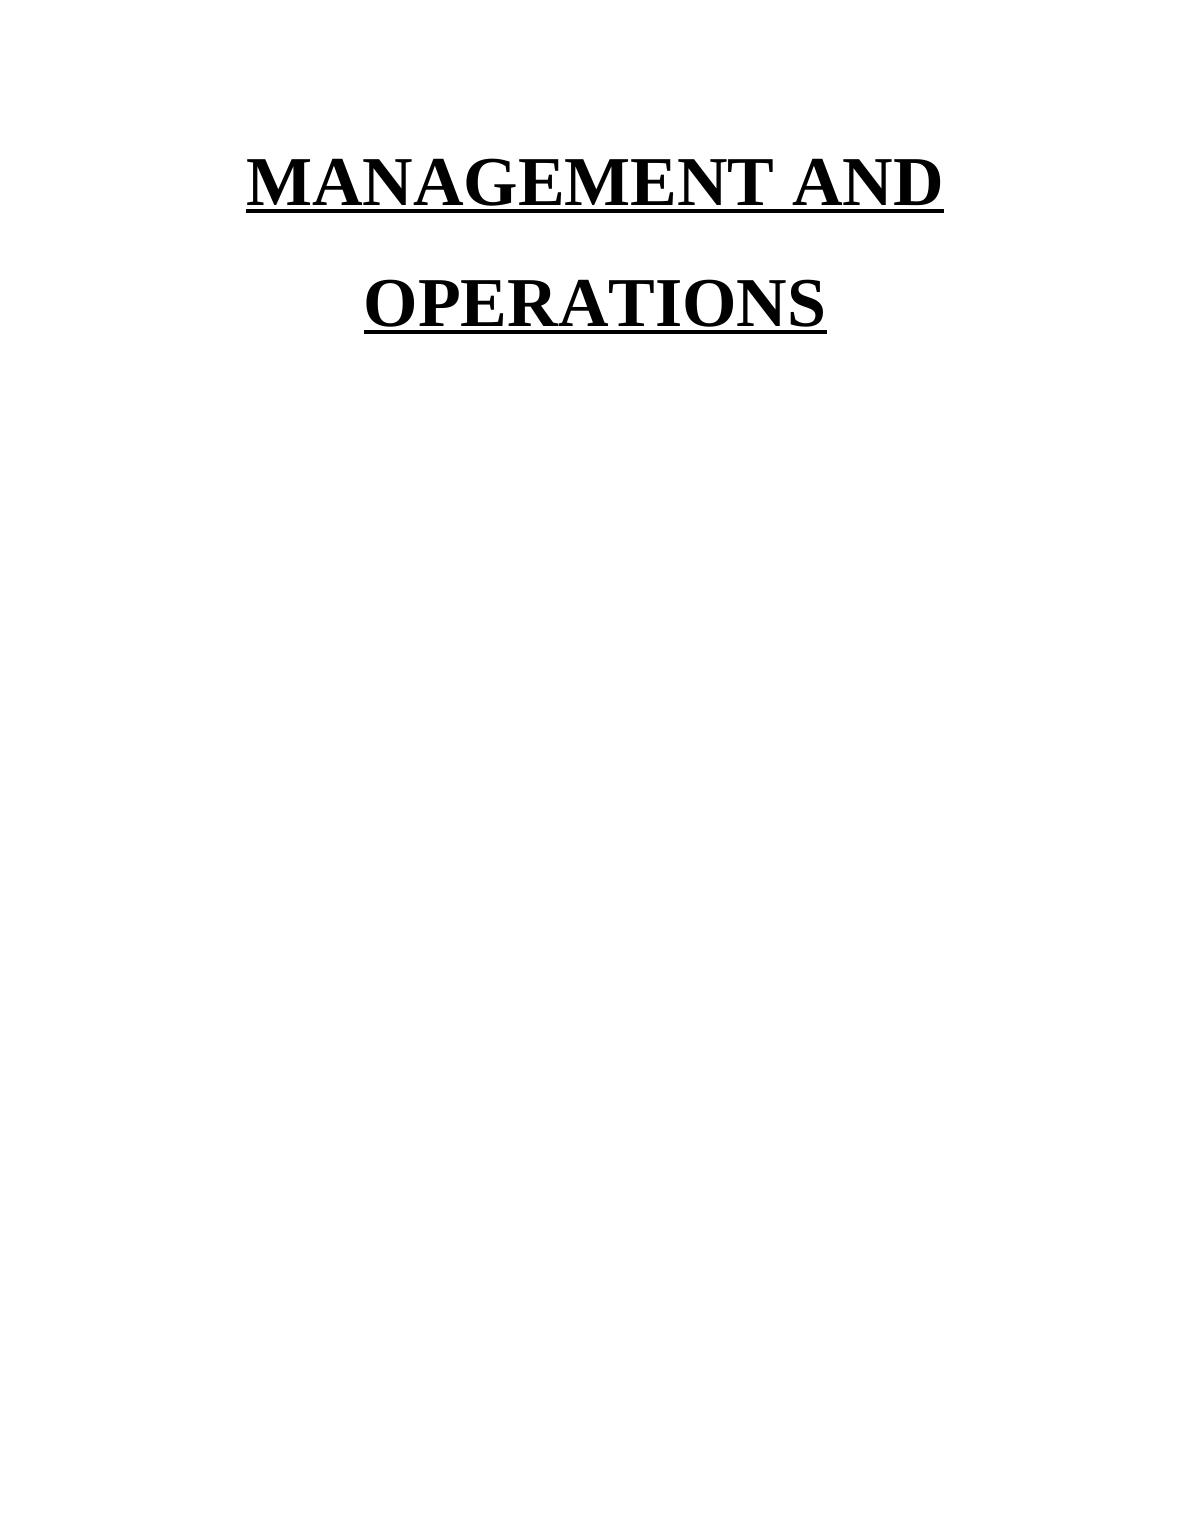 Importance of Operations and Management PDF_1